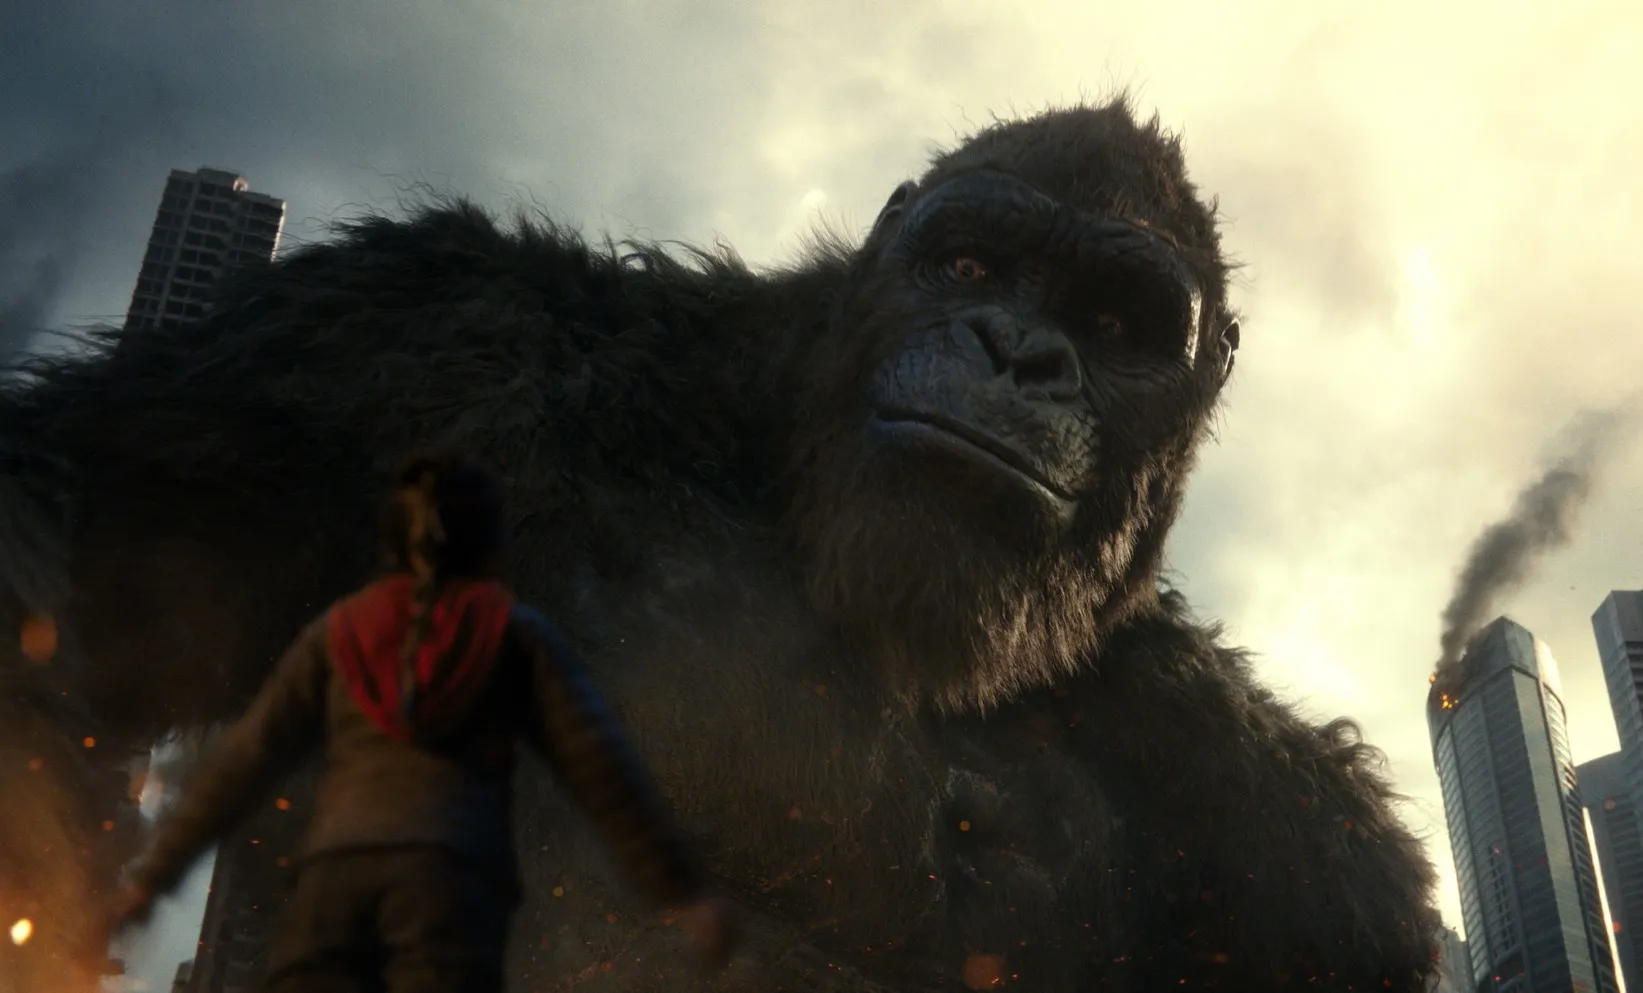 Godzilla X Kong - The New Empire: what to expect from the plot